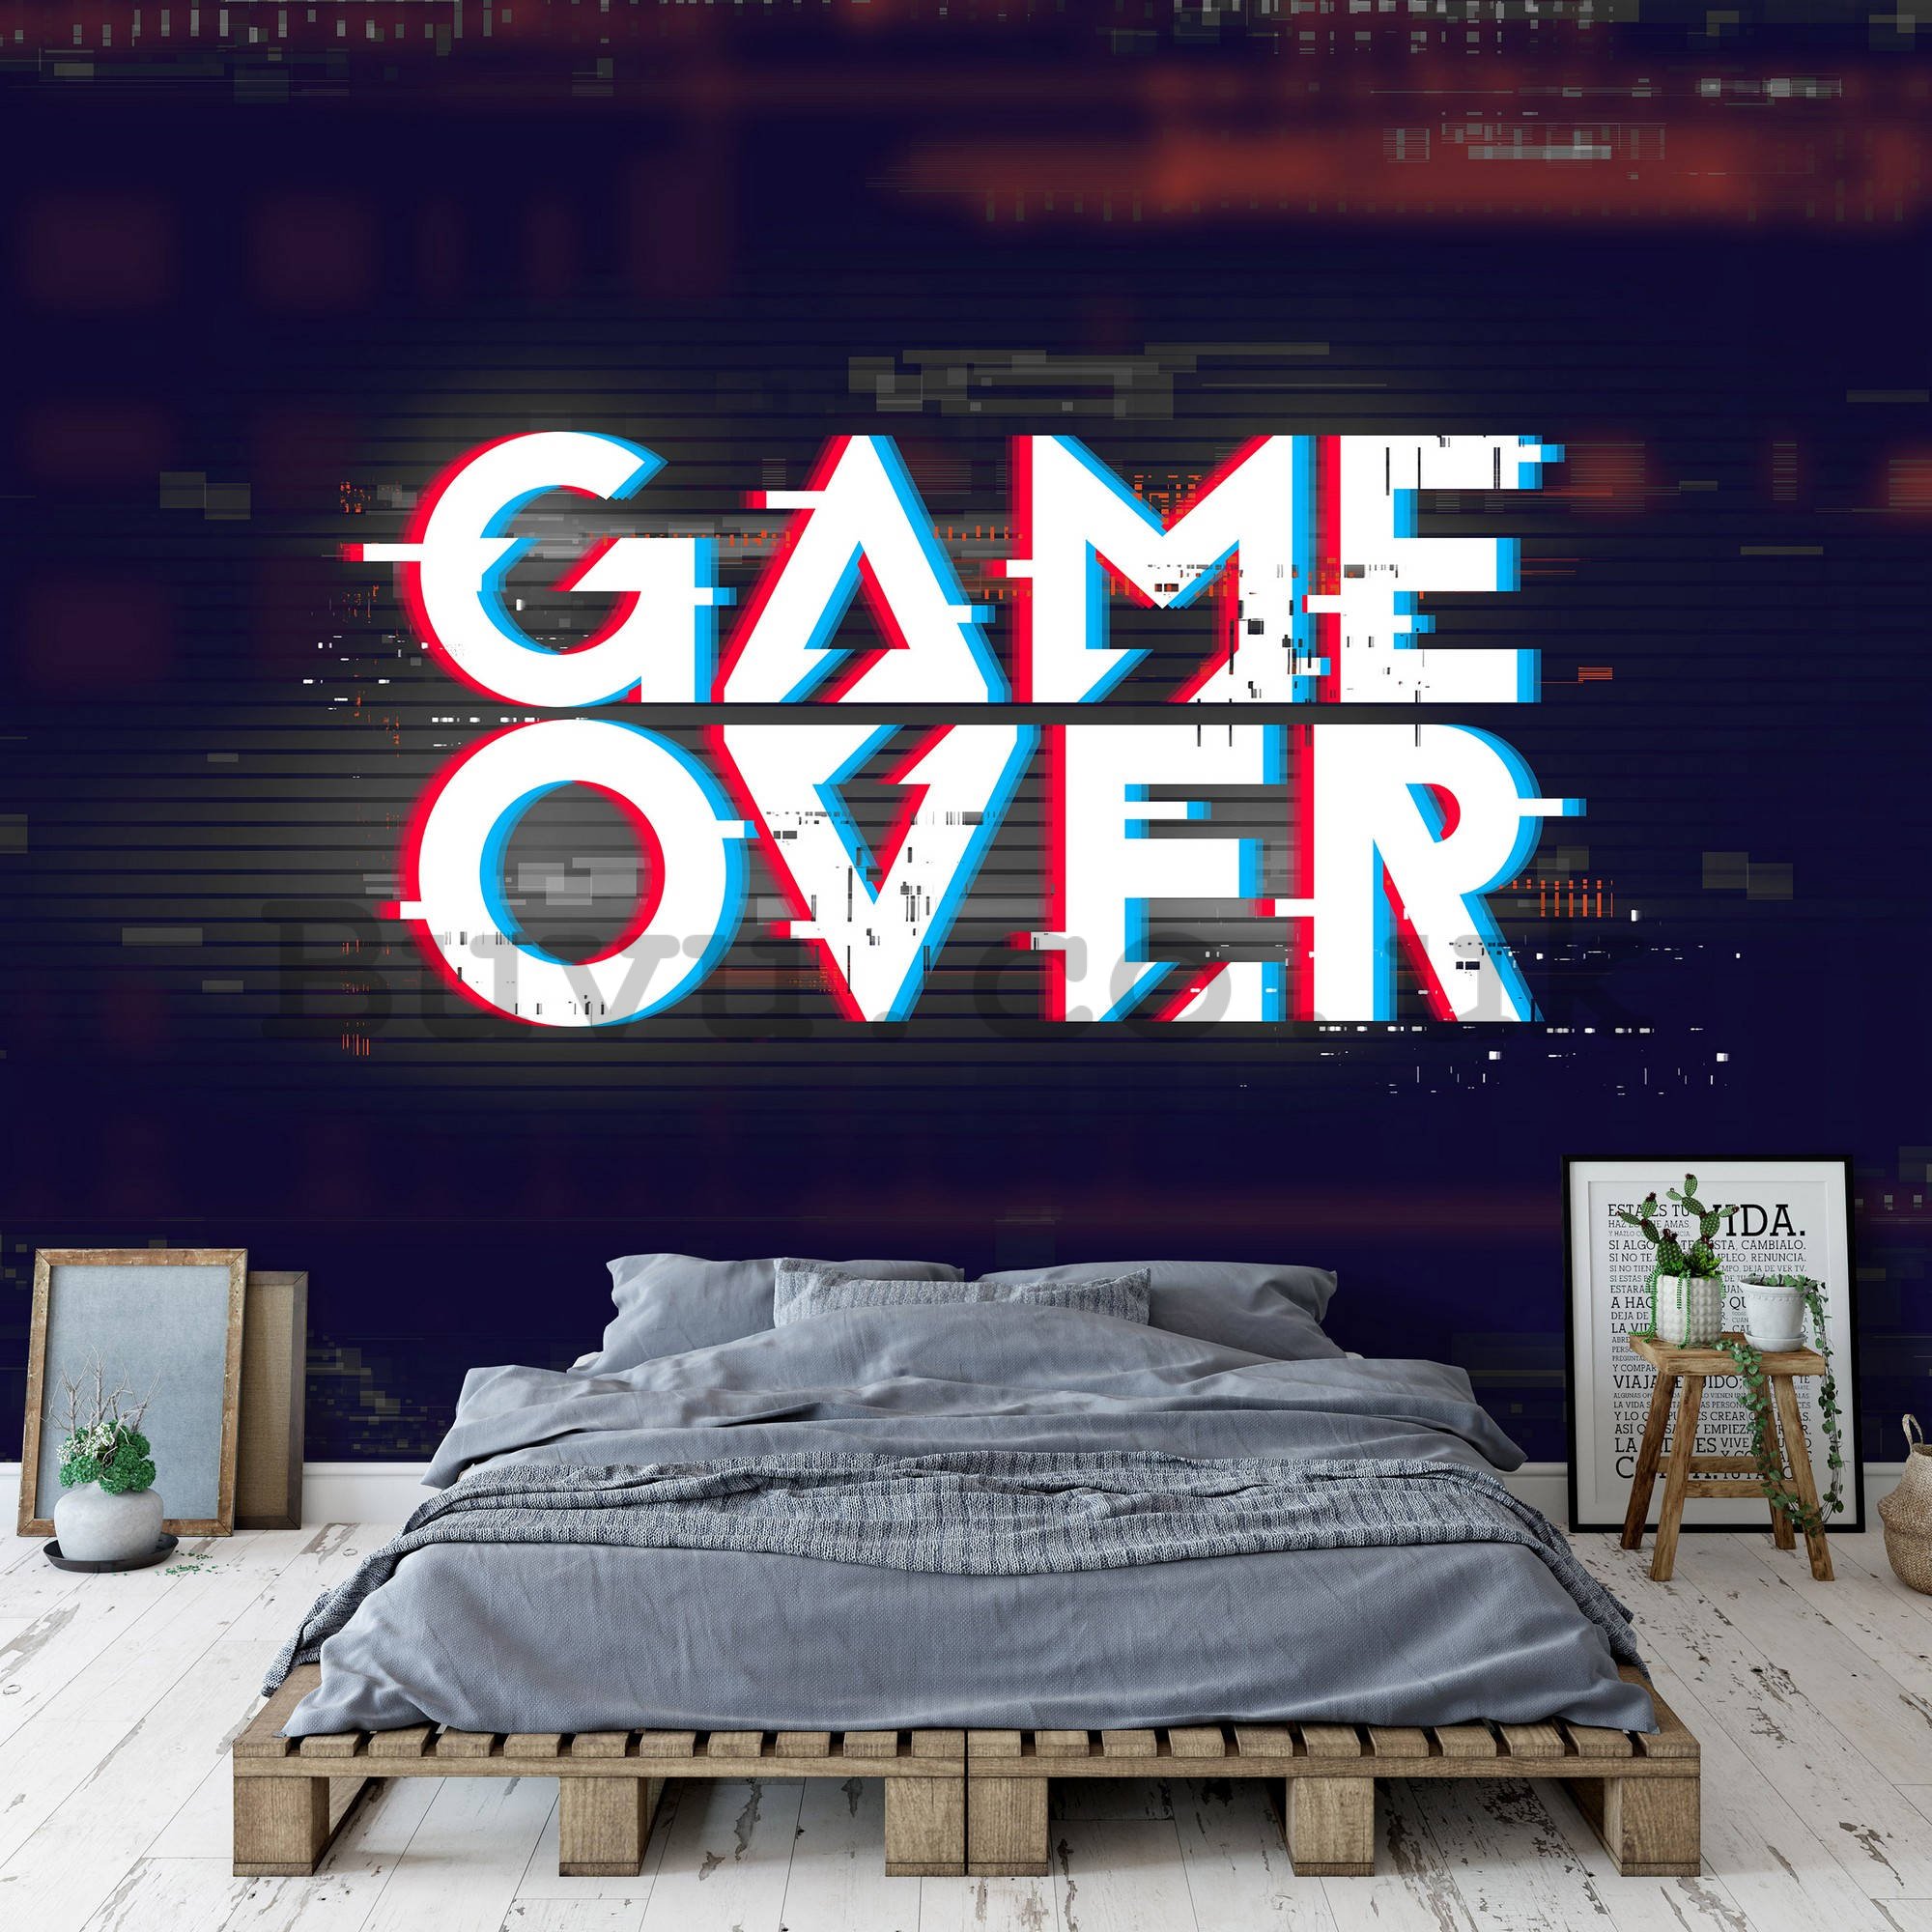 Wall mural vlies: Game Over - 368x254 cm